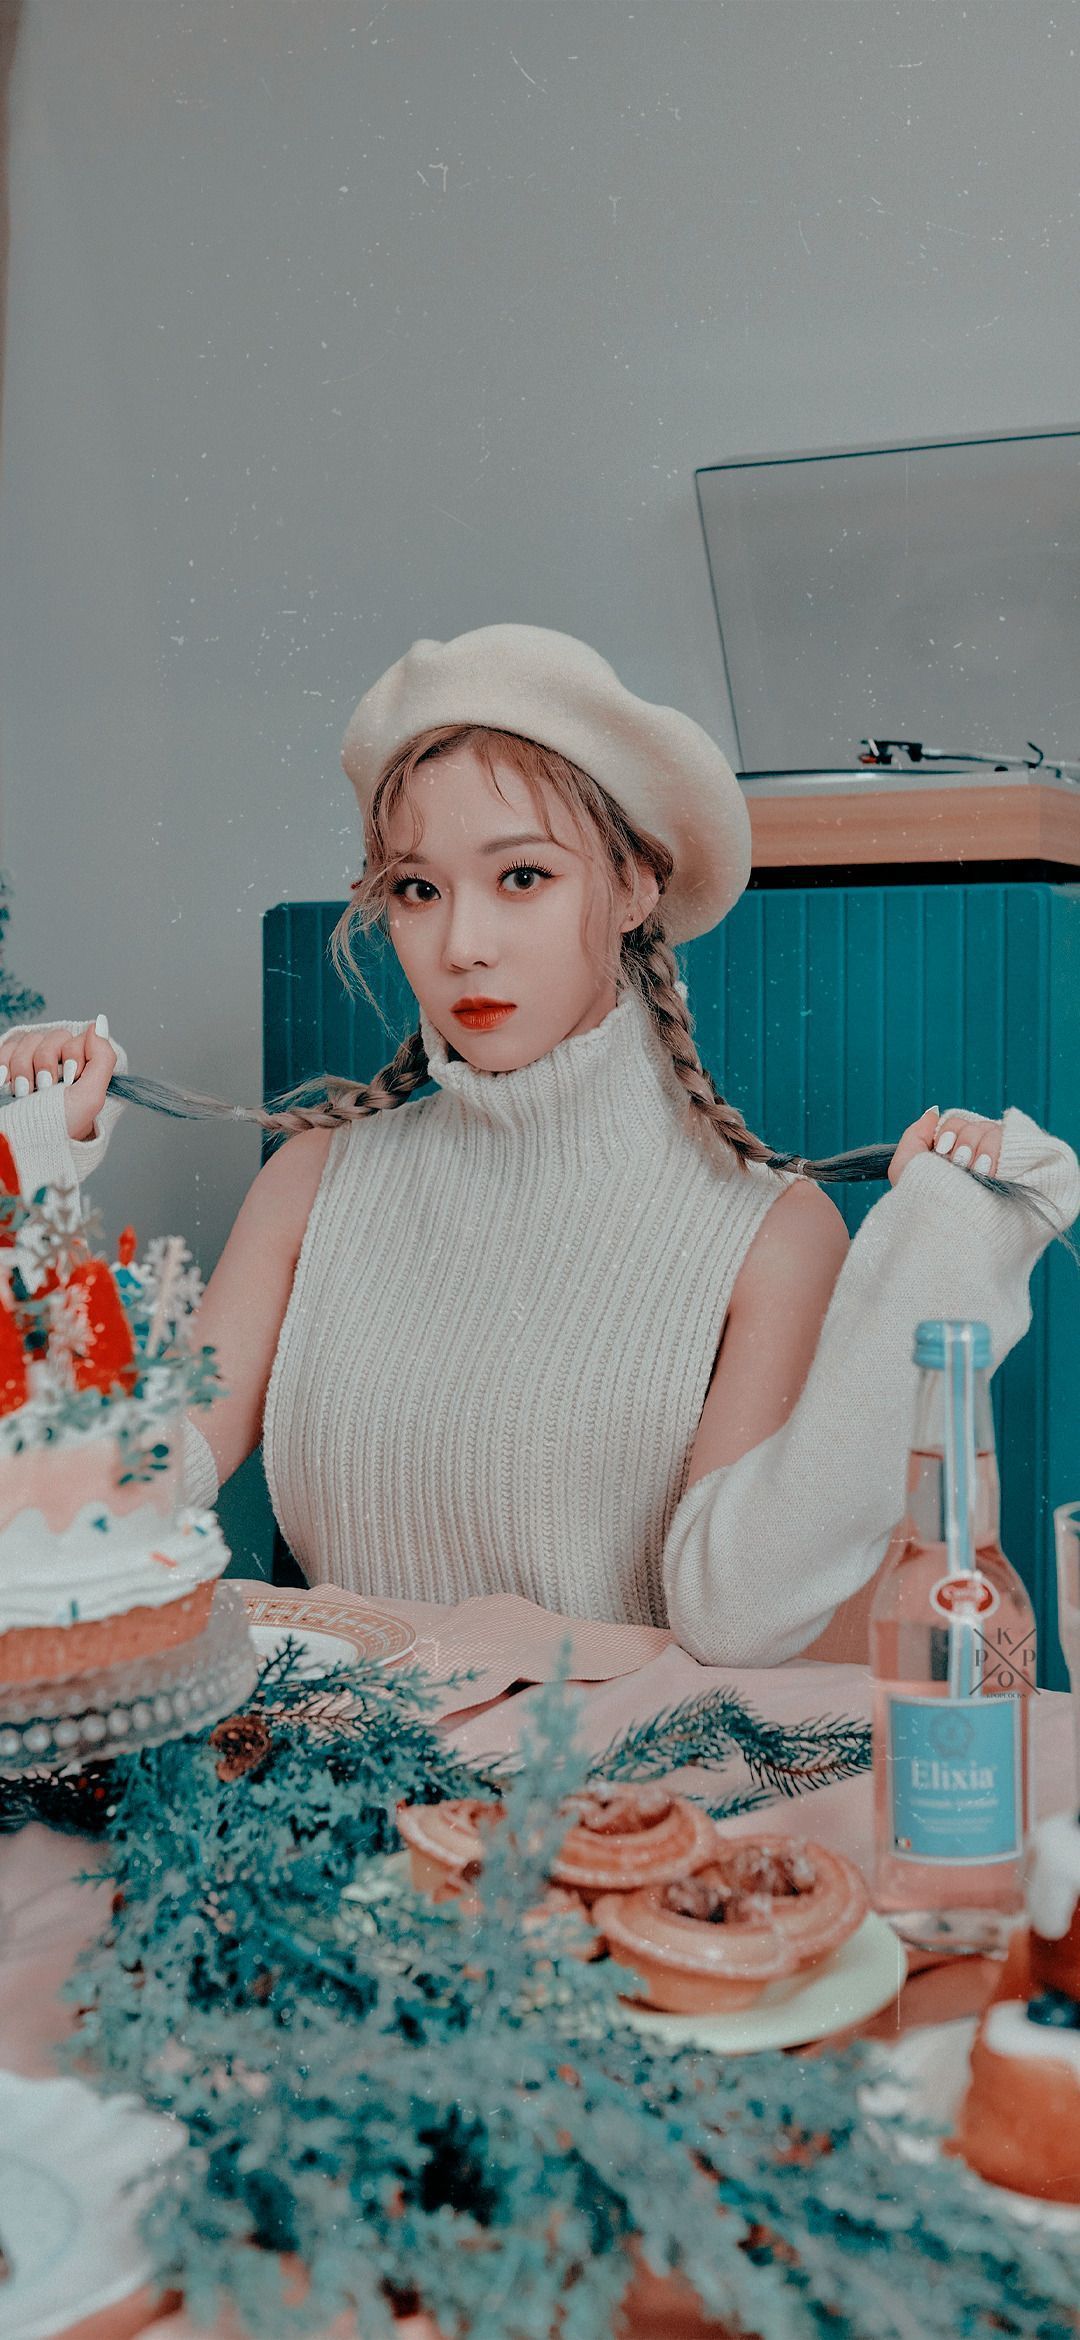 A female with white beret sitting in front of a cake - Aespa